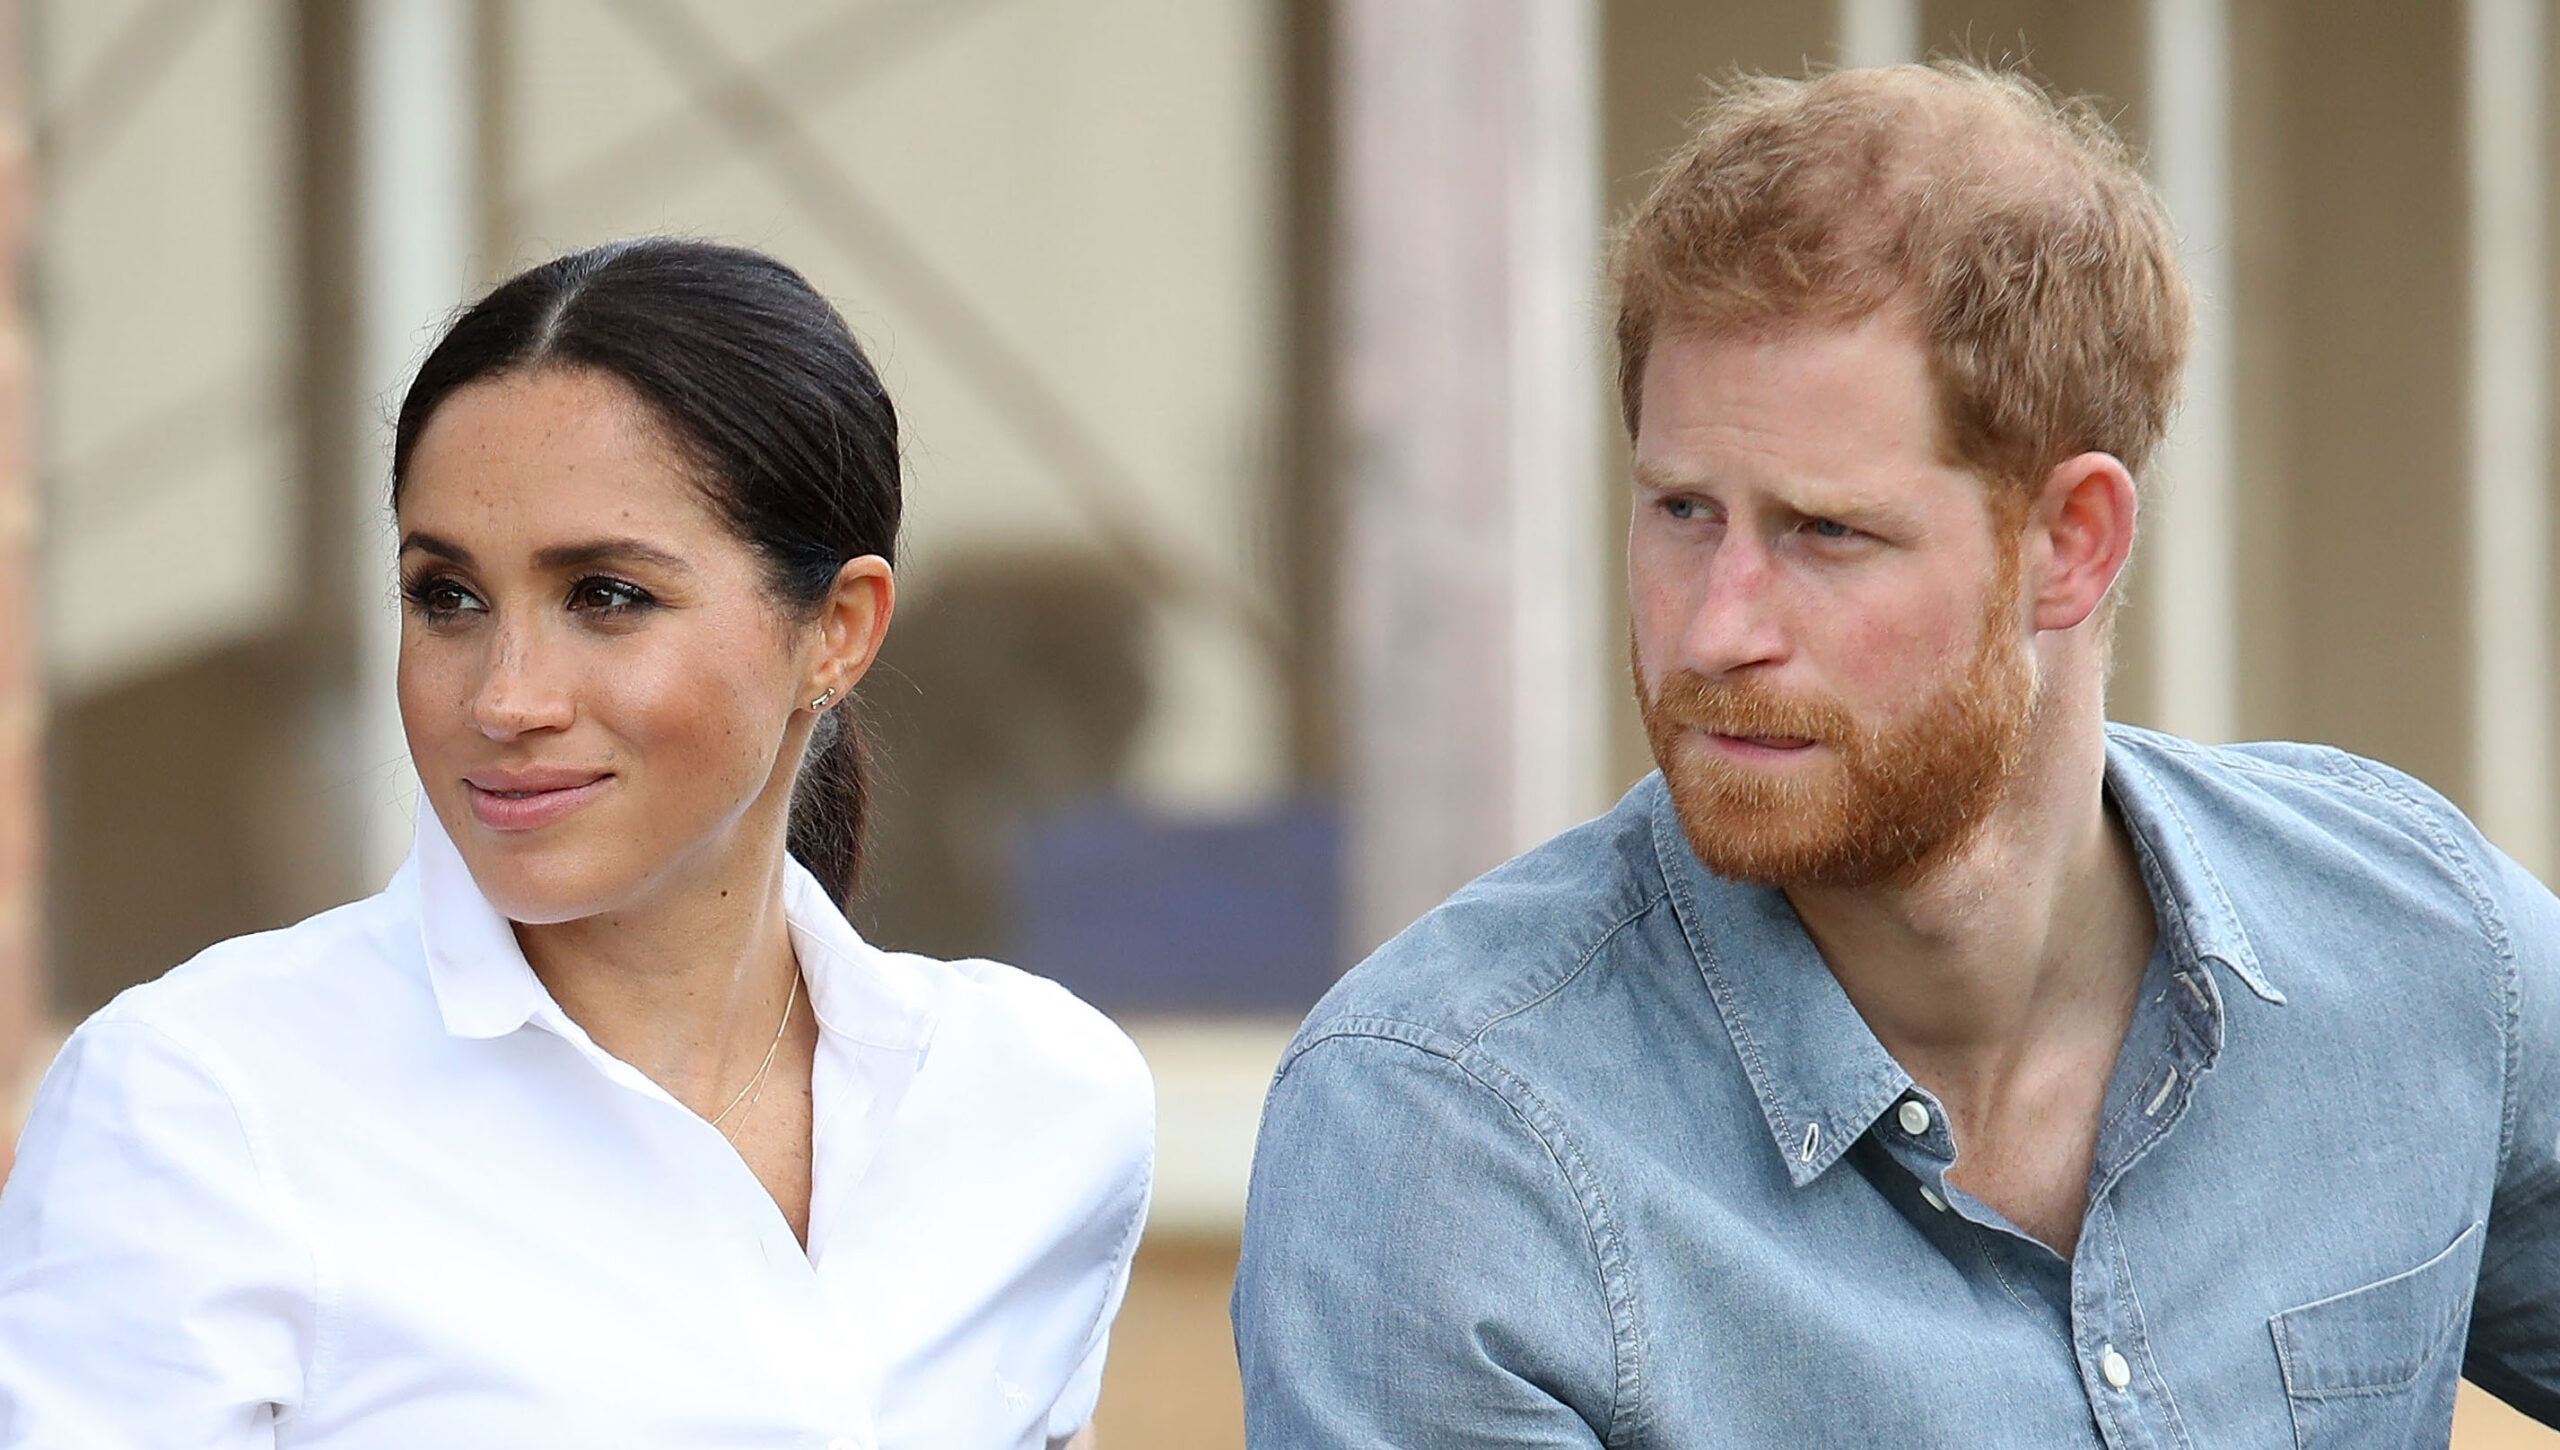 Meghan Markle and Prince Harry rumored to ink huge fashion deal.